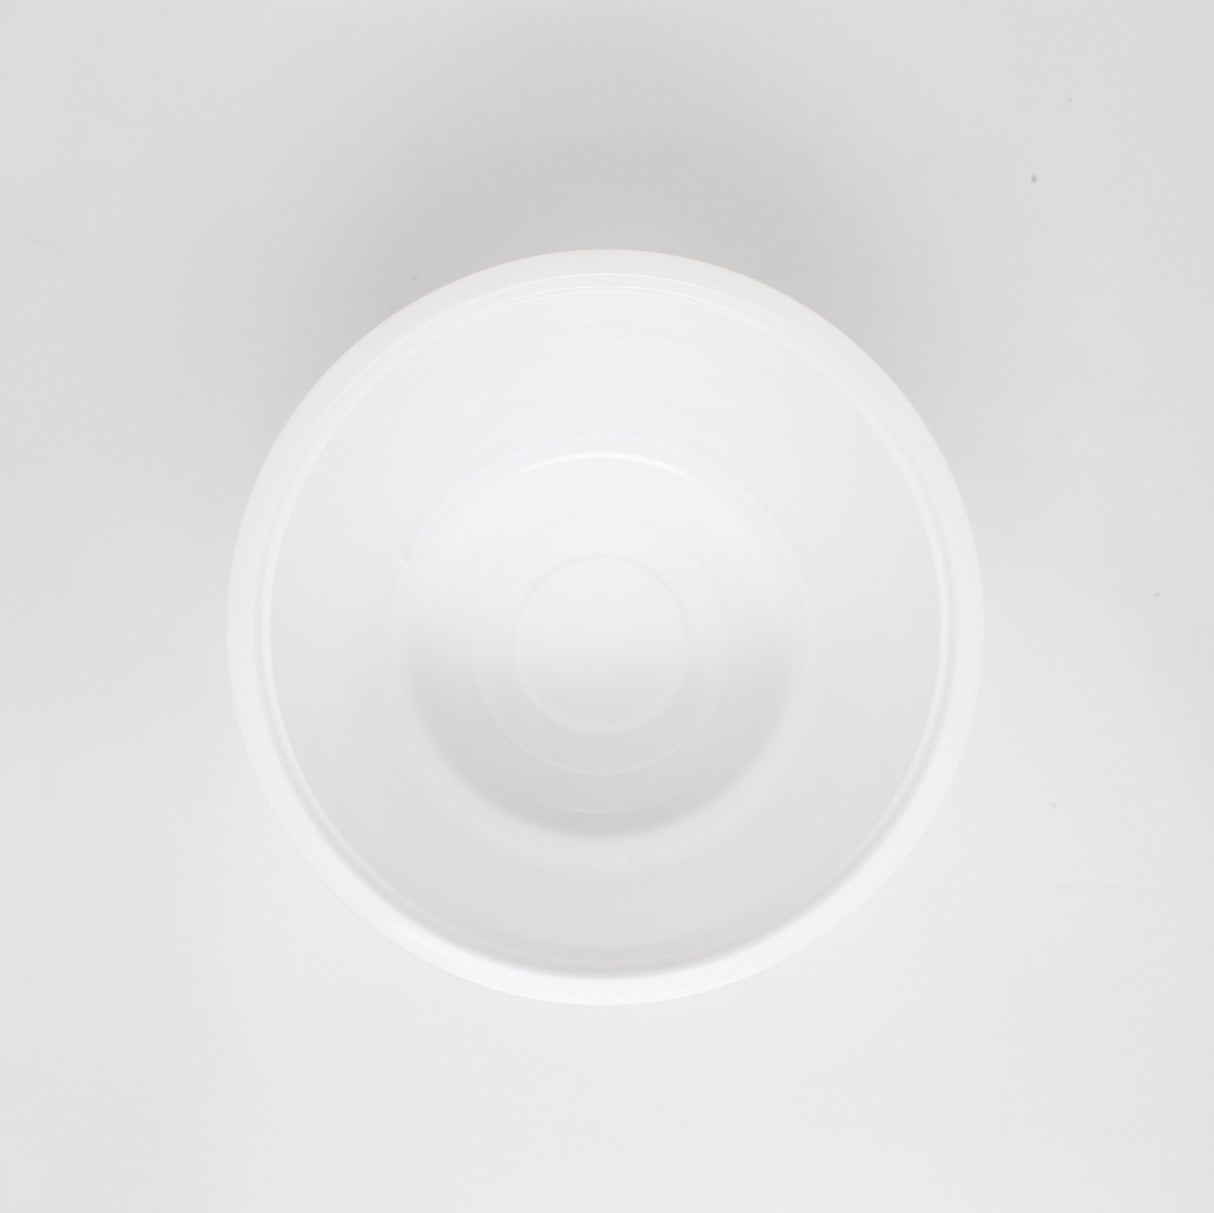 2000P | 66oz Microwaveable PP White Round Bowl (Base Only) - 300 Pcs - HD Plastic Product (Canada). Inc